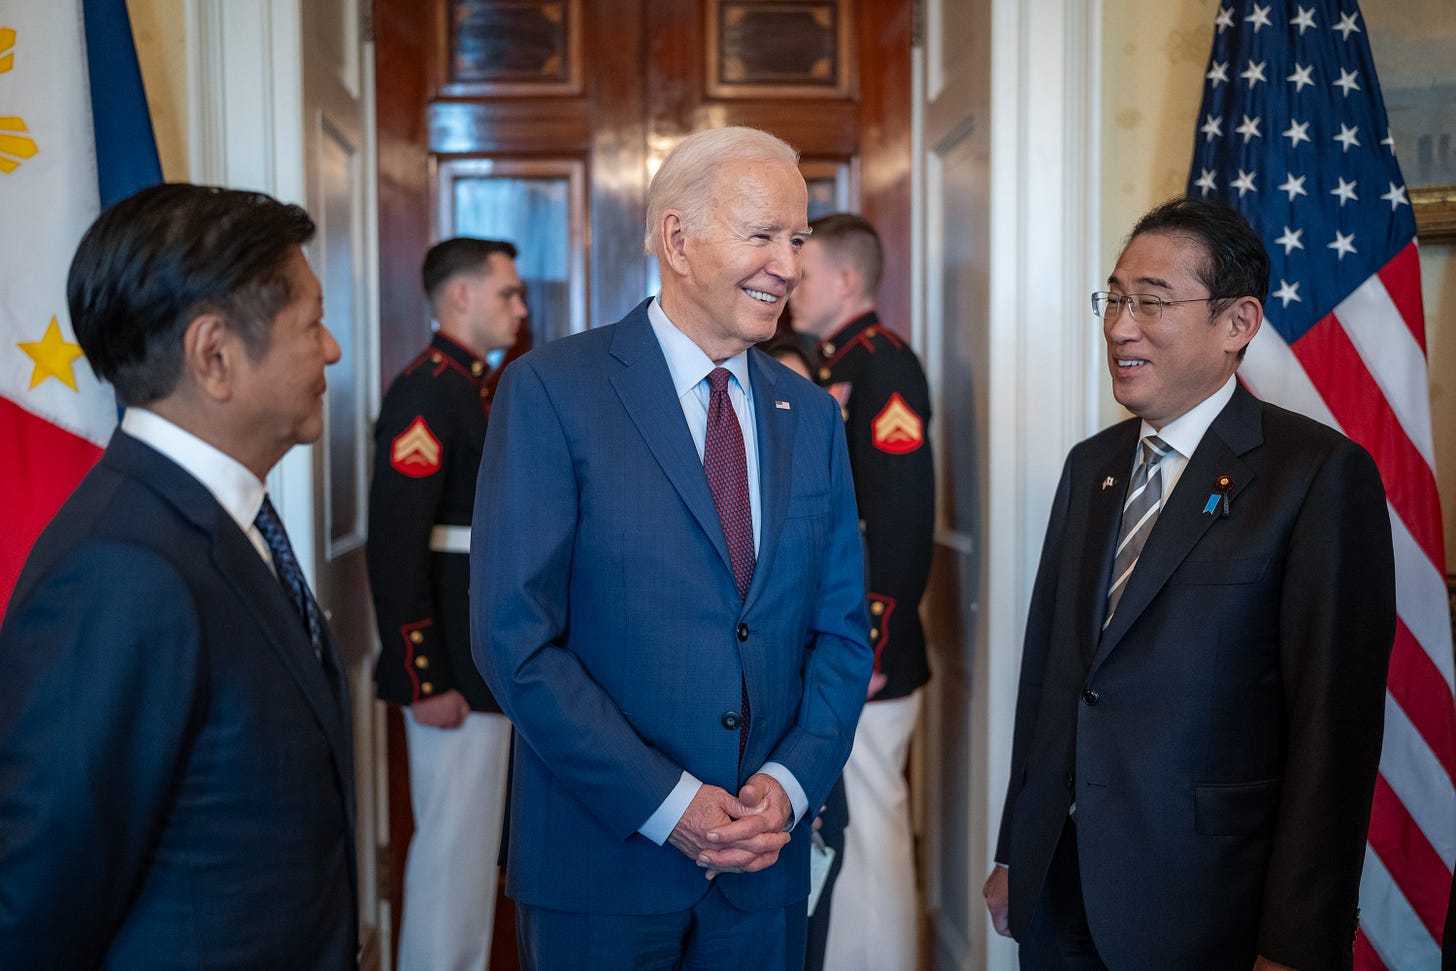 President Biden stands with President Marcos and Prime Minister Kishida.